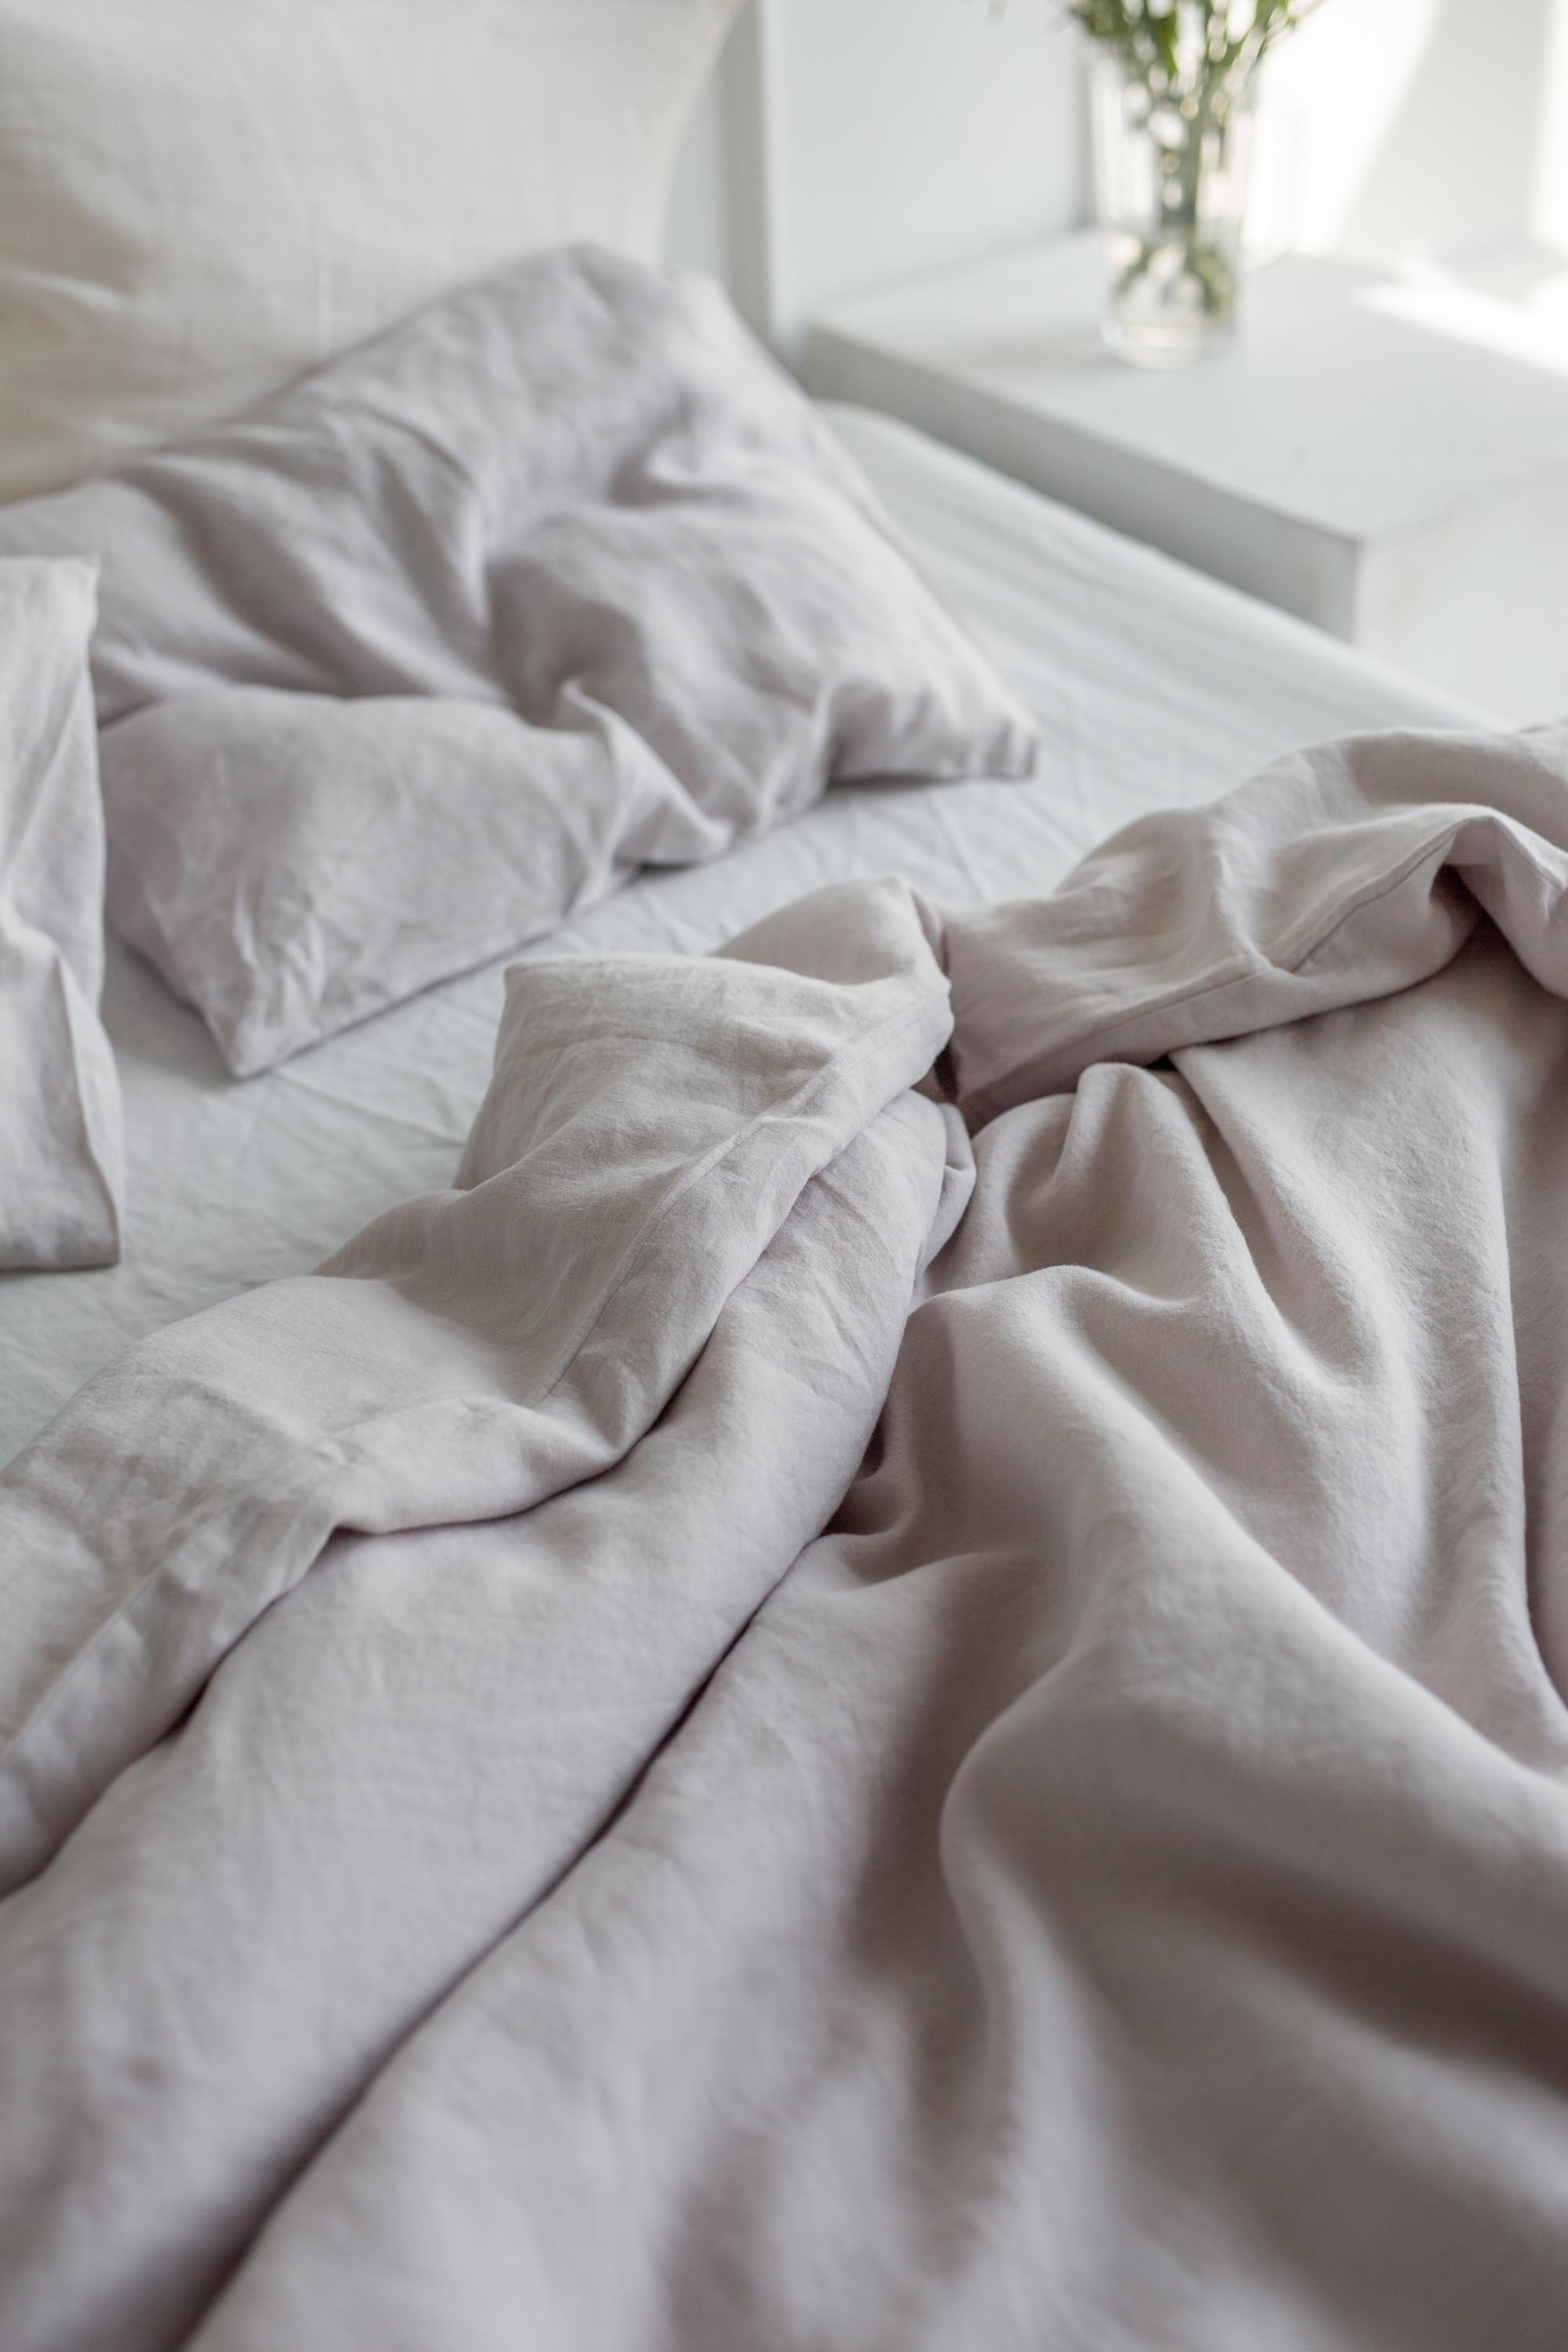 Undone Bed With Cream Linen Duvet Cover By AmourlInen